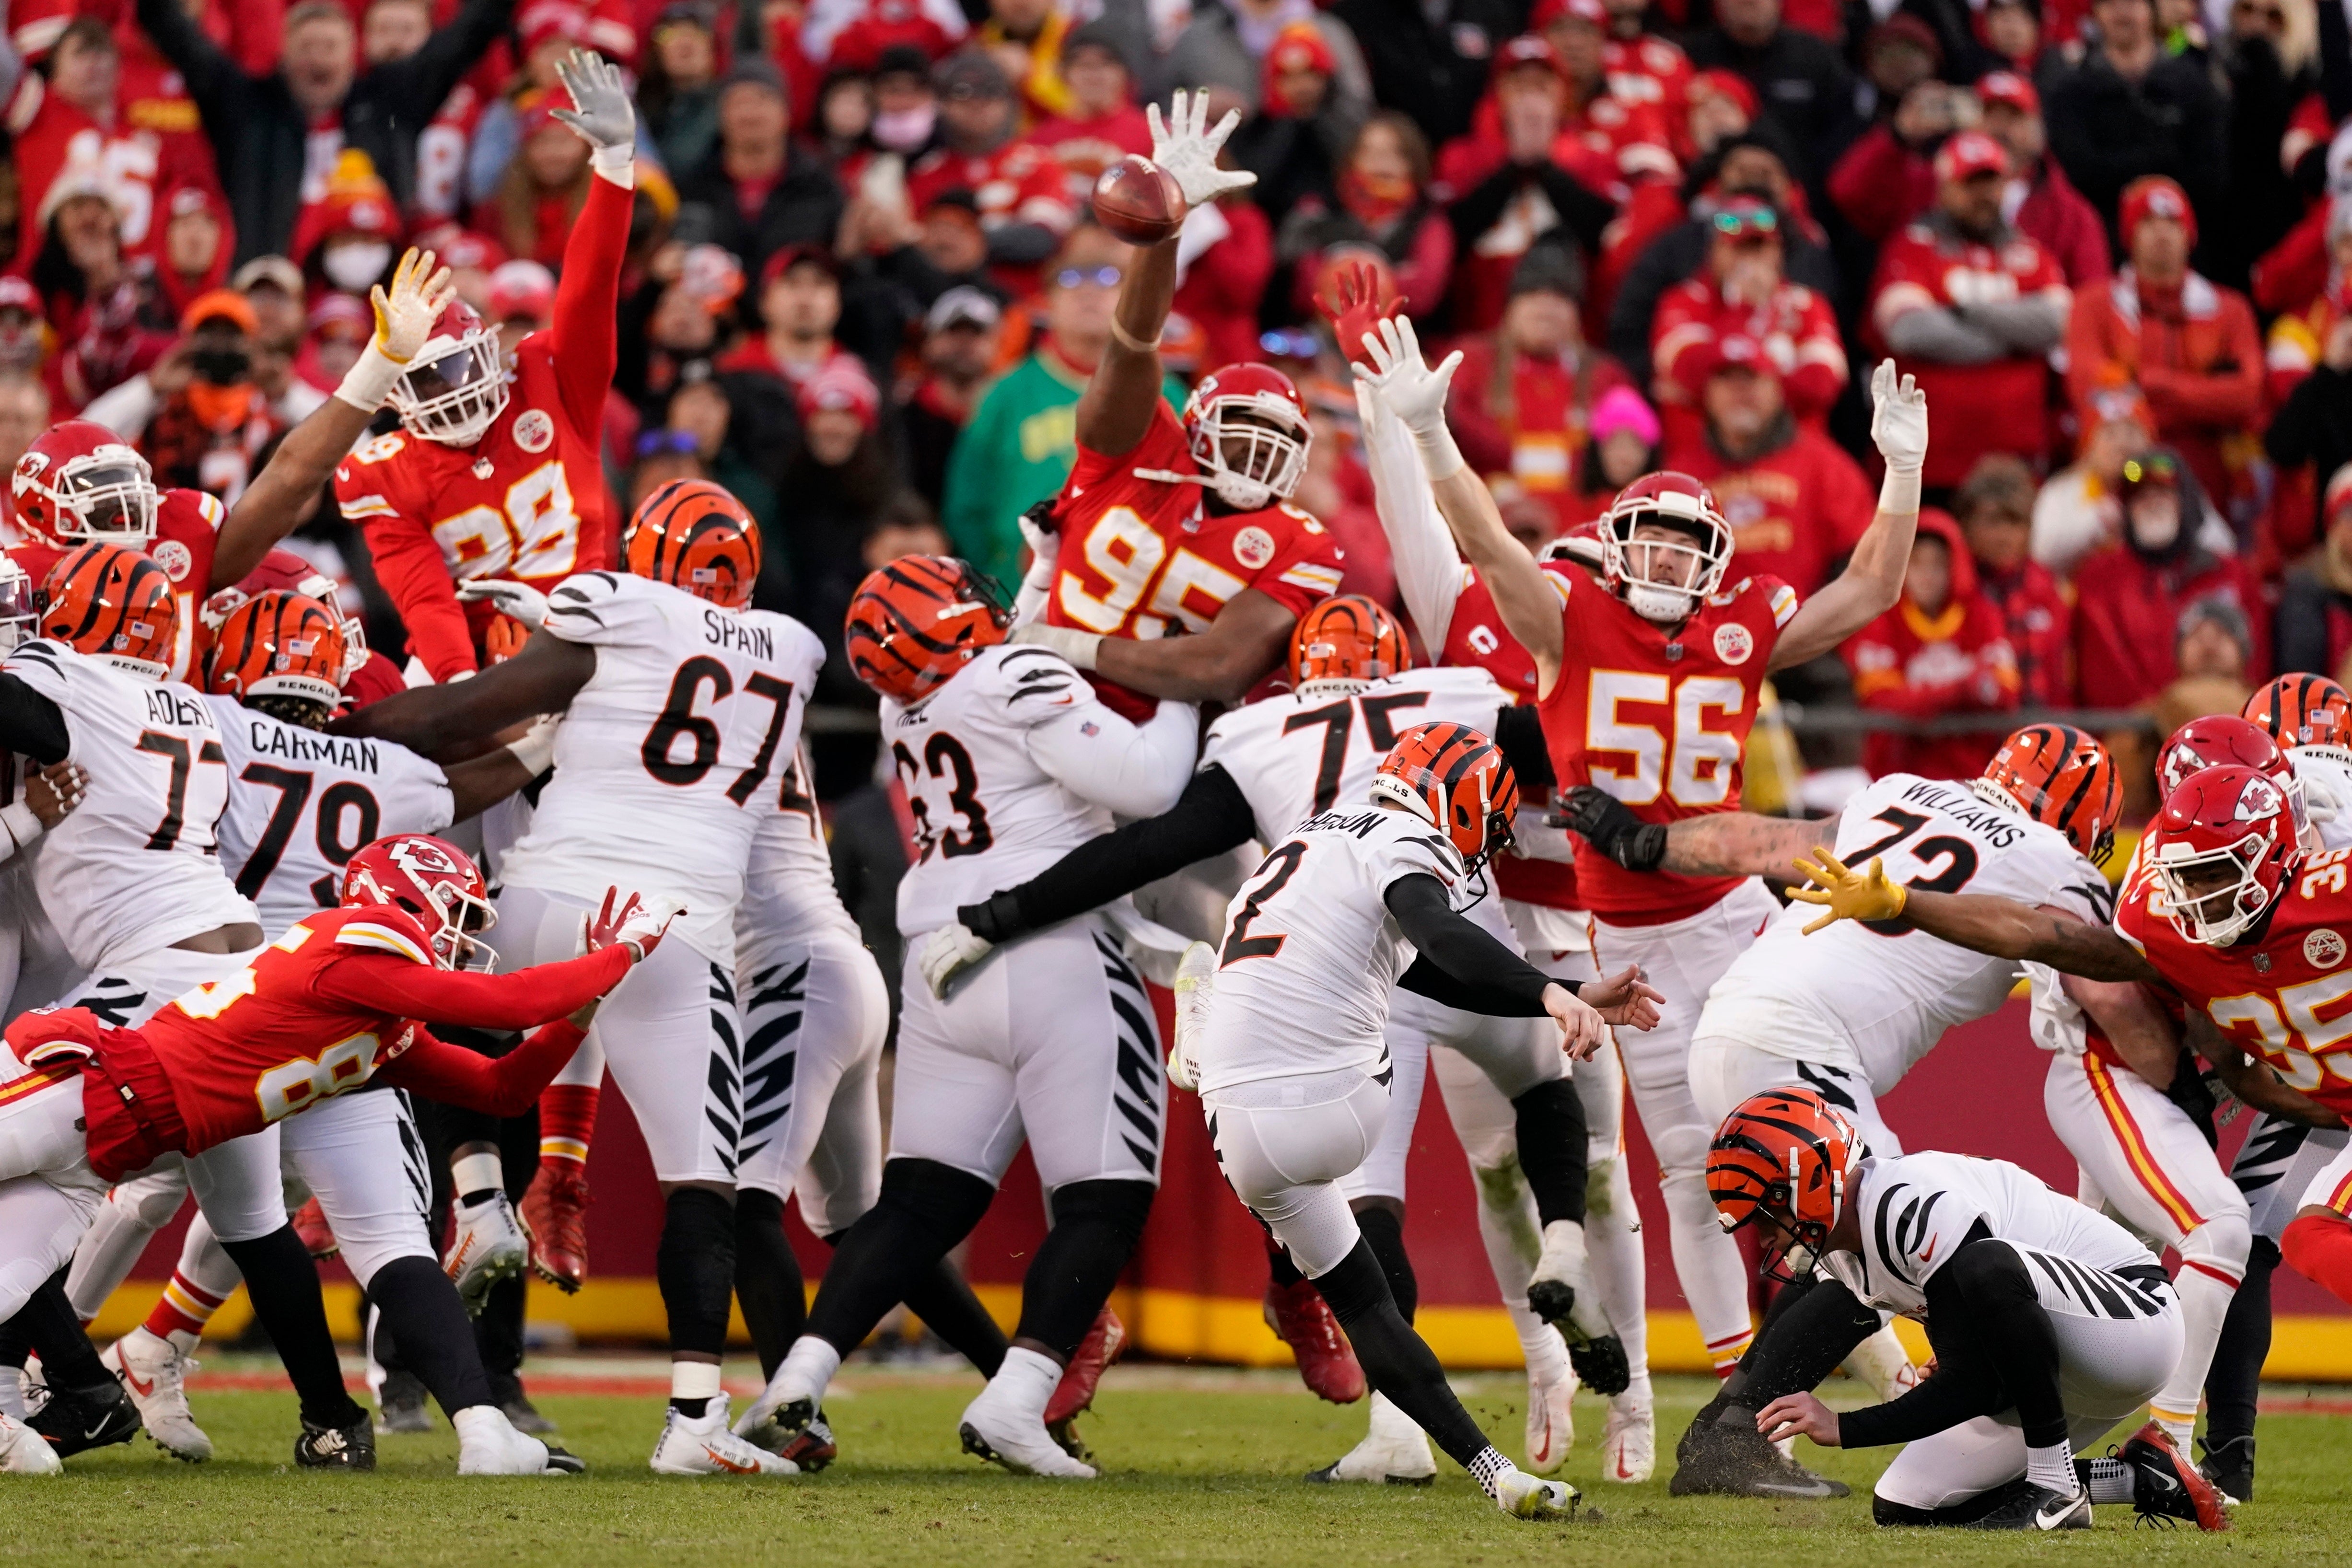 bengals chiefs afc championship full game